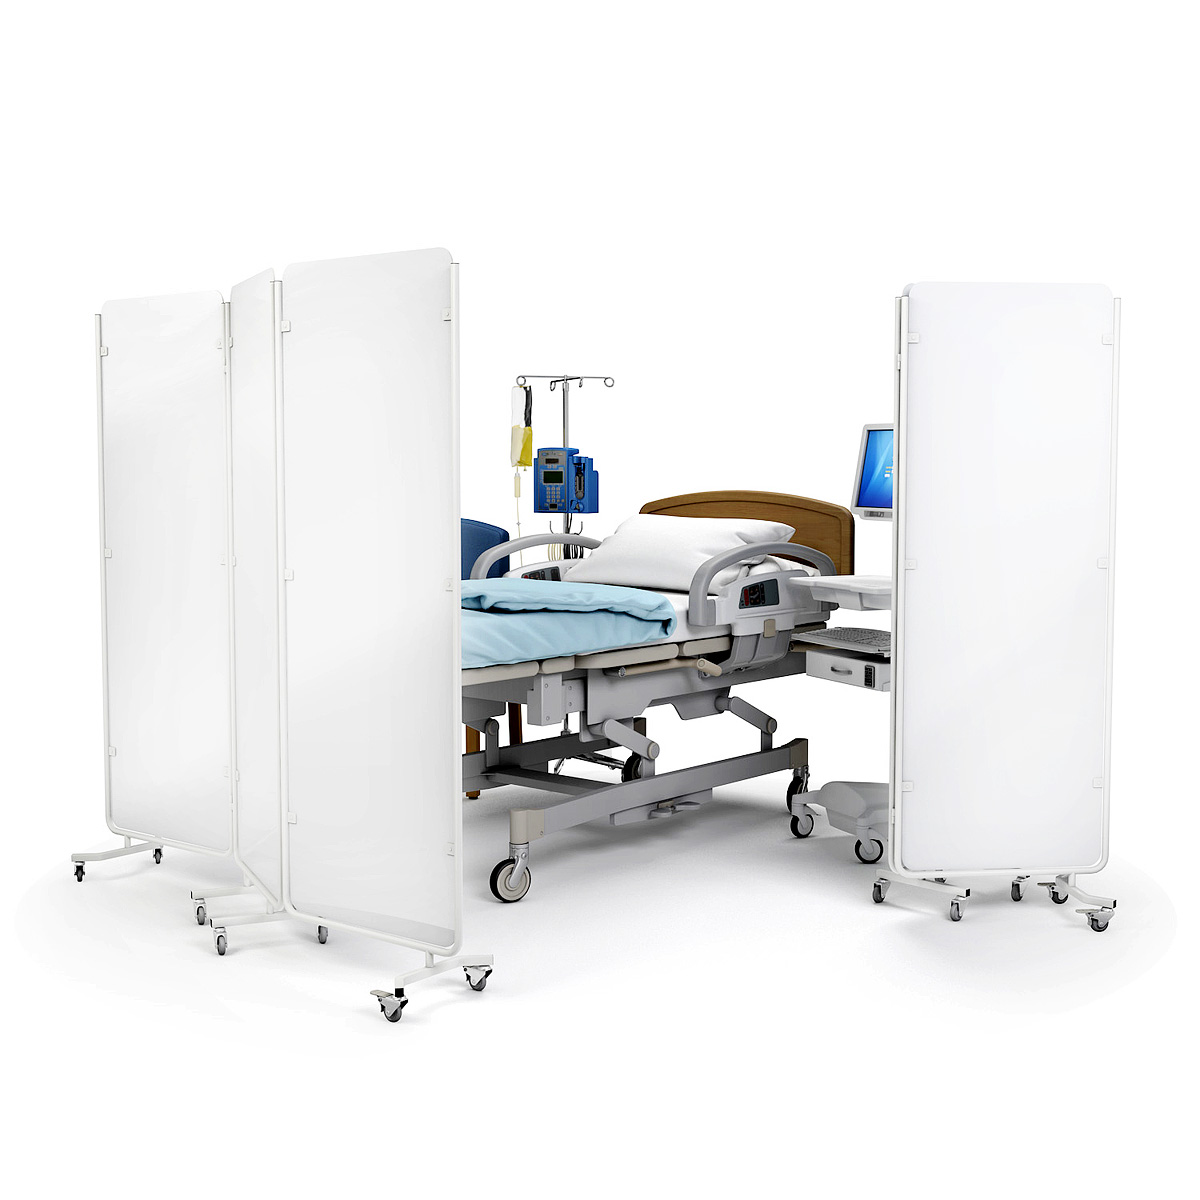 DIGNITY® PLUS Medical Screens Provide Patient Privacy & Dignity